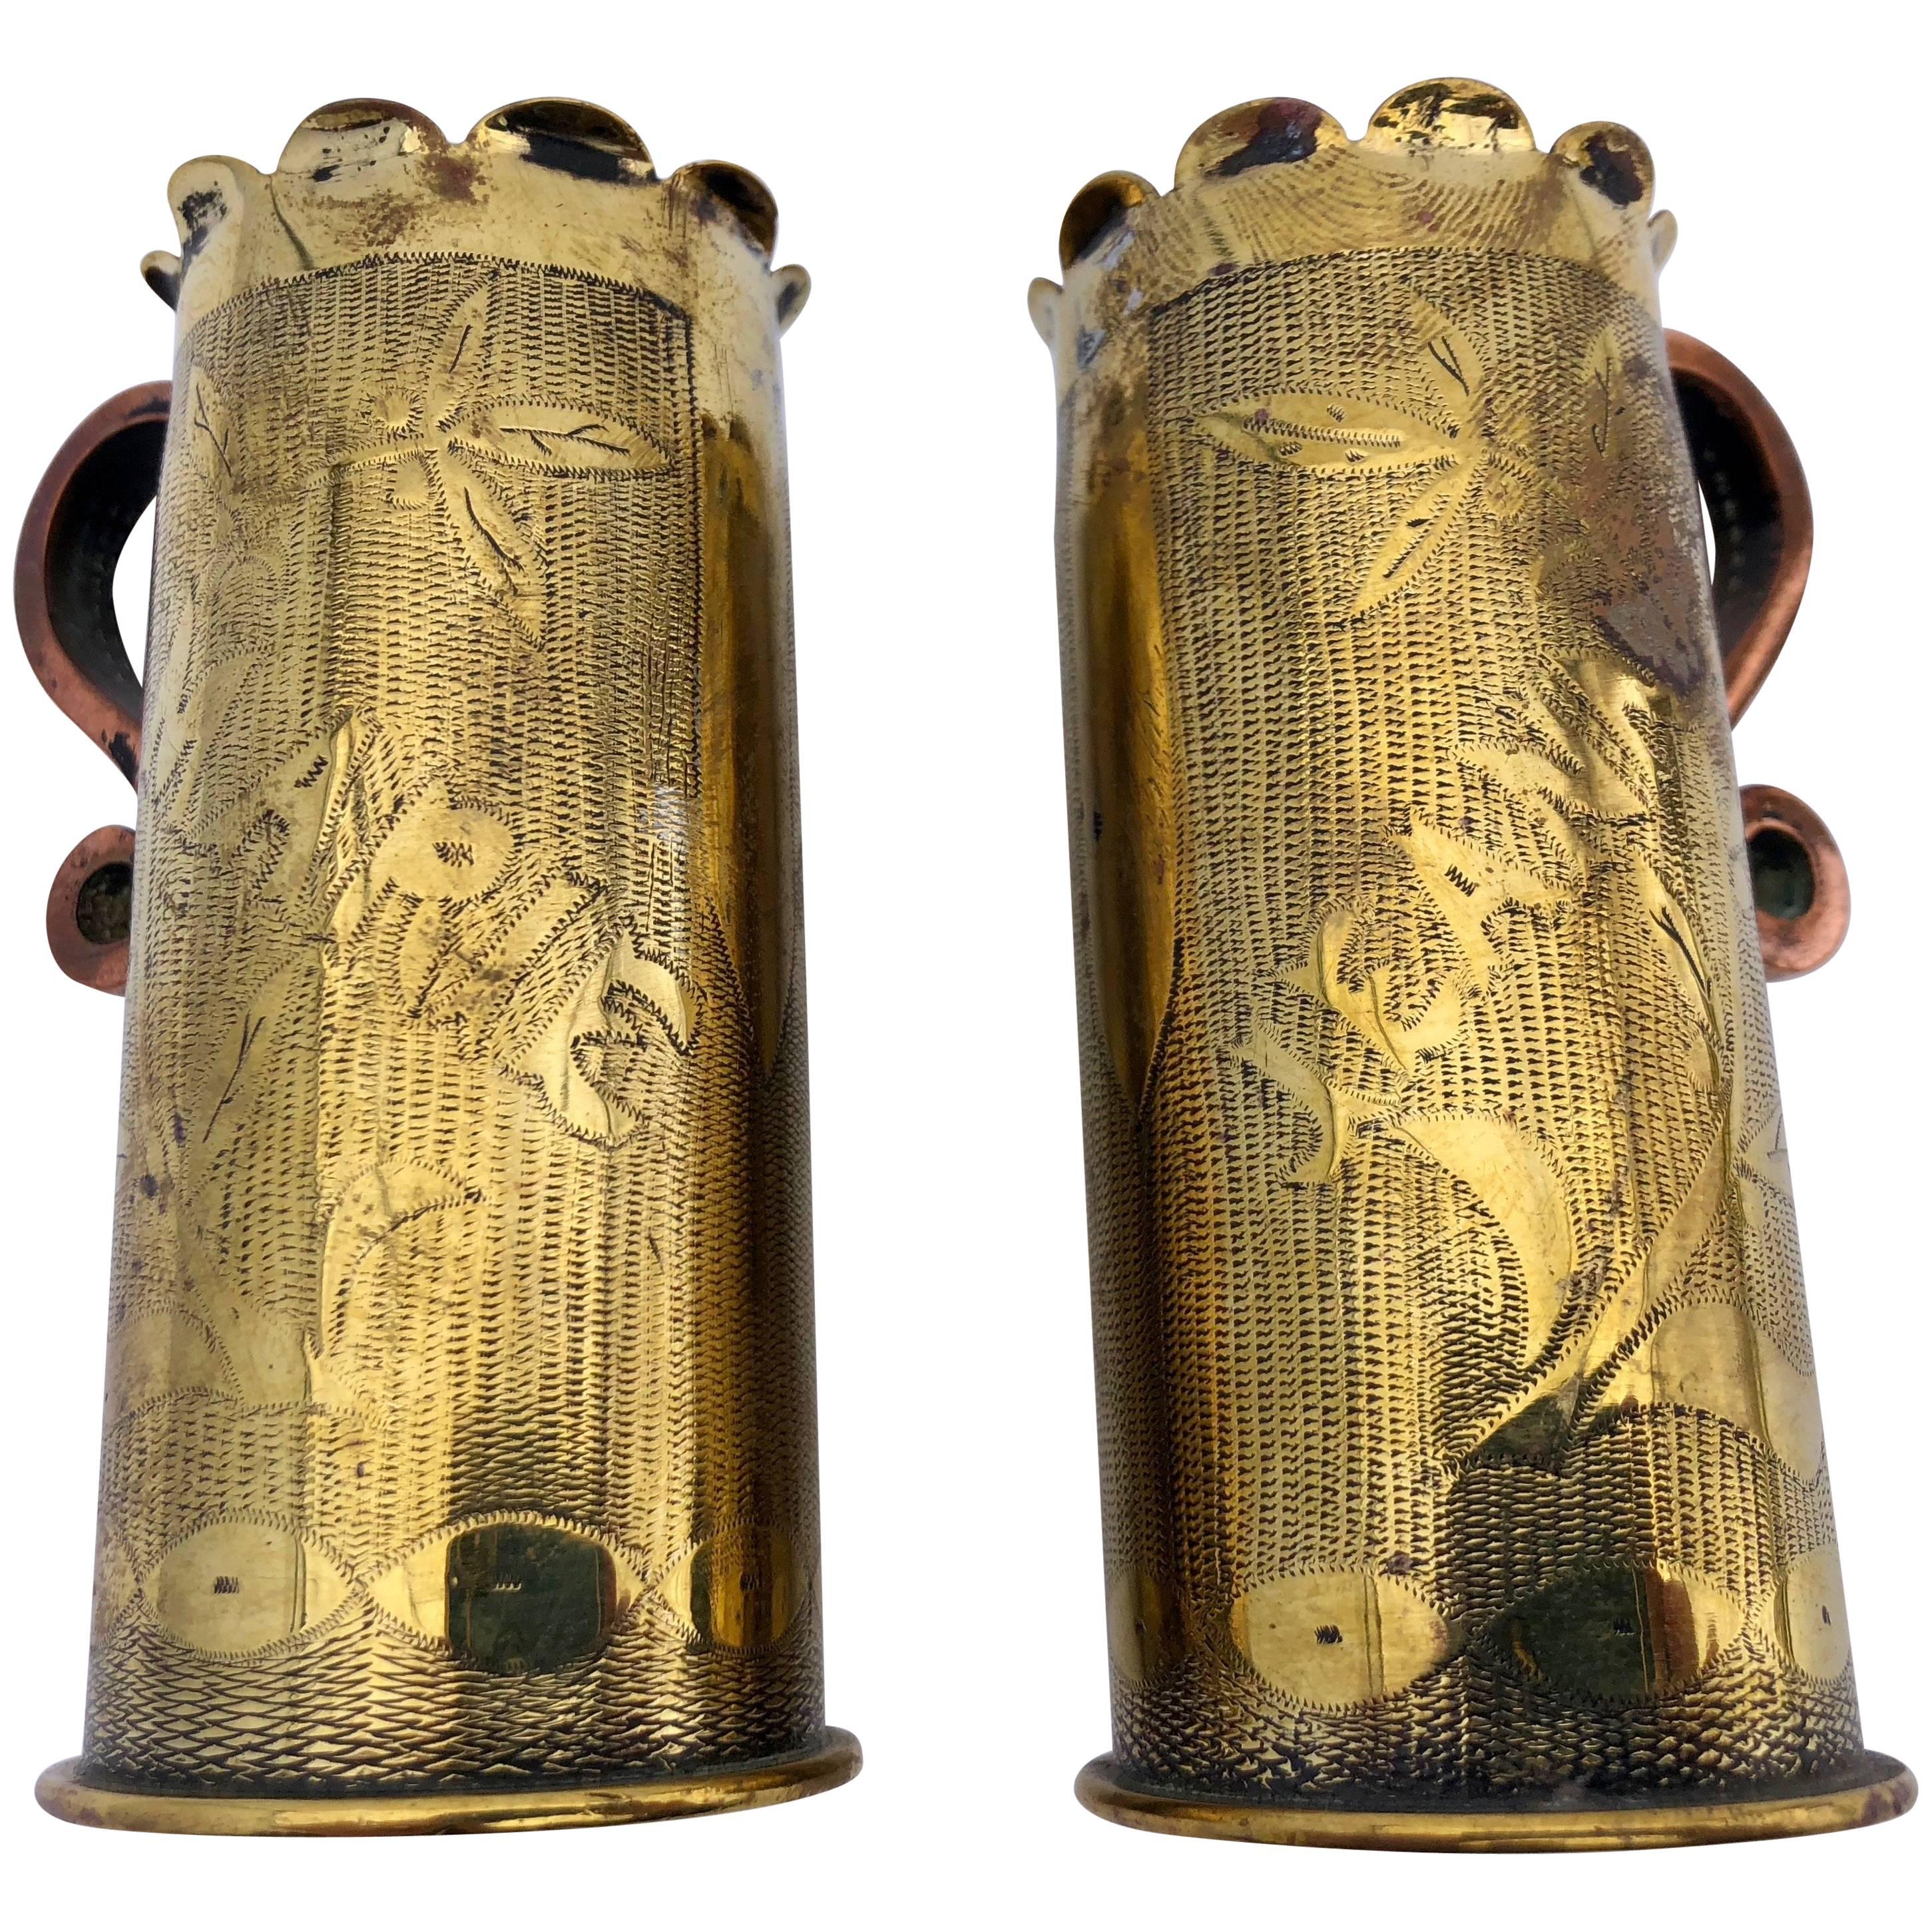 French First World War Trench Art, Two Brass Shells Engraved Names of a Couple For Sale